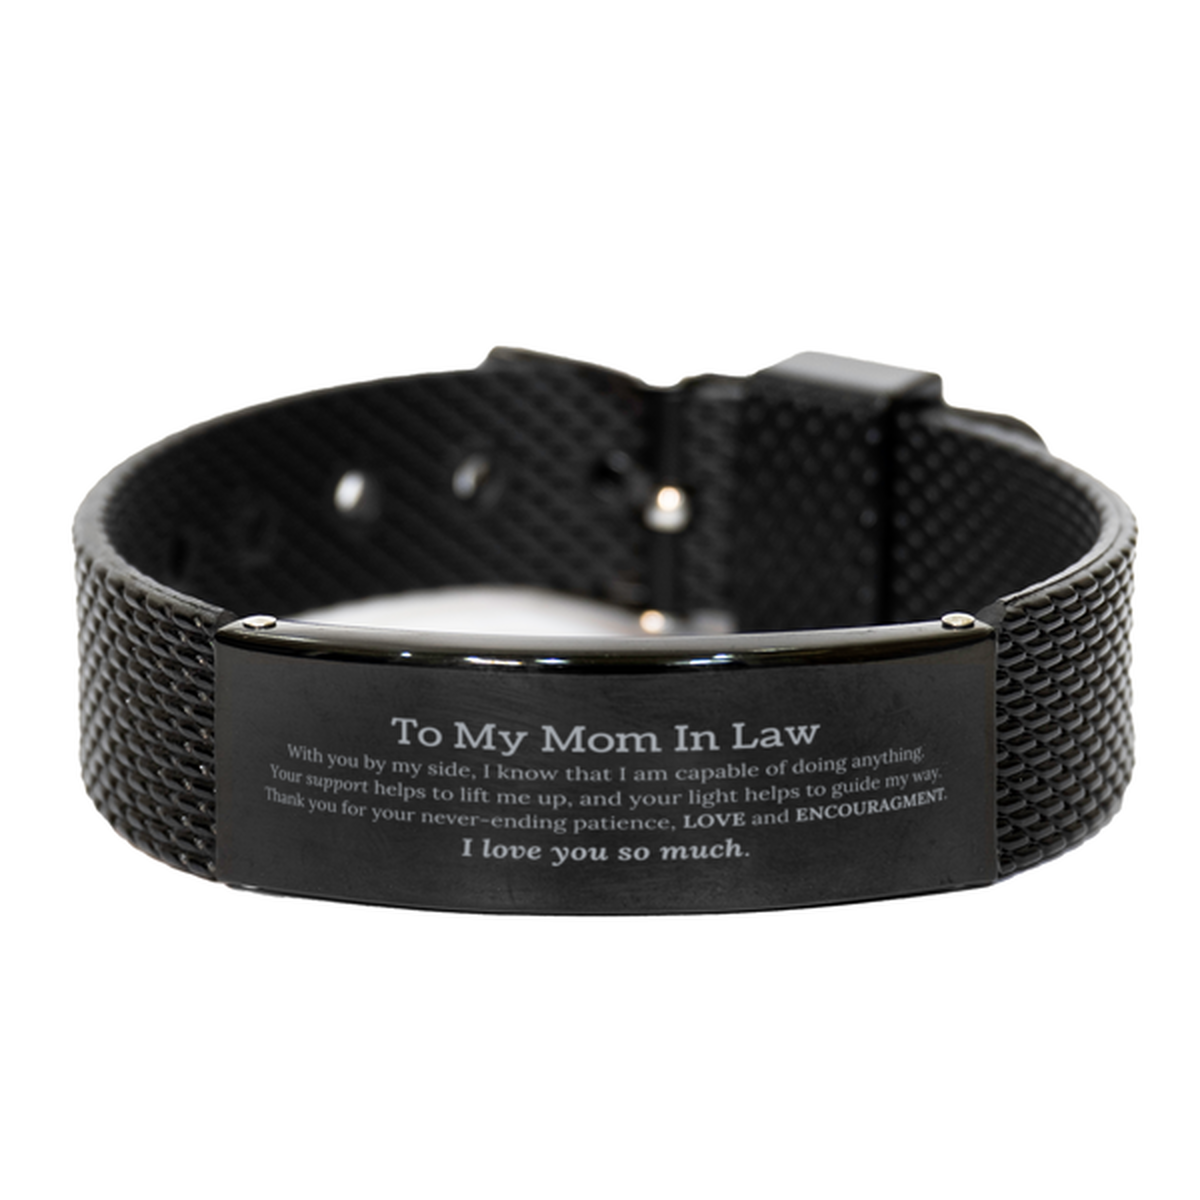 Appreciation Mom In Law Black Shark Mesh Bracelet Gifts, To My Mom In Law Birthday Christmas Wedding Keepsake Gifts for Mom In Law With you by my side, I know that I am capable of doing anything. I love you so much